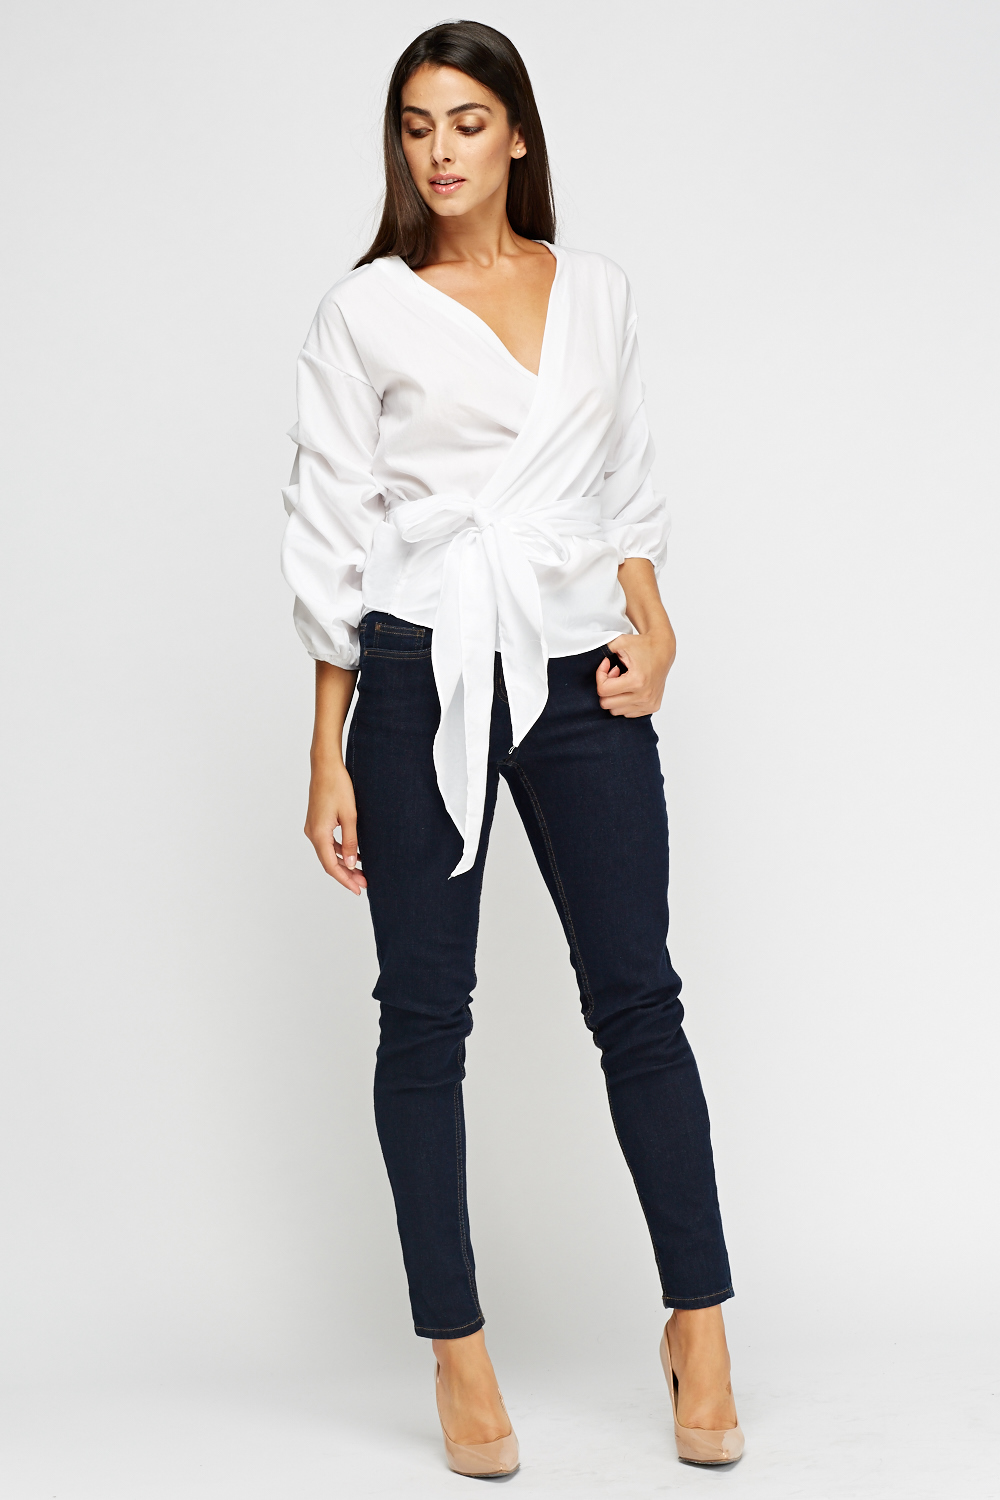 Aikha Ruched Sleeves White Top - Limited edition | Discount Designer Stock